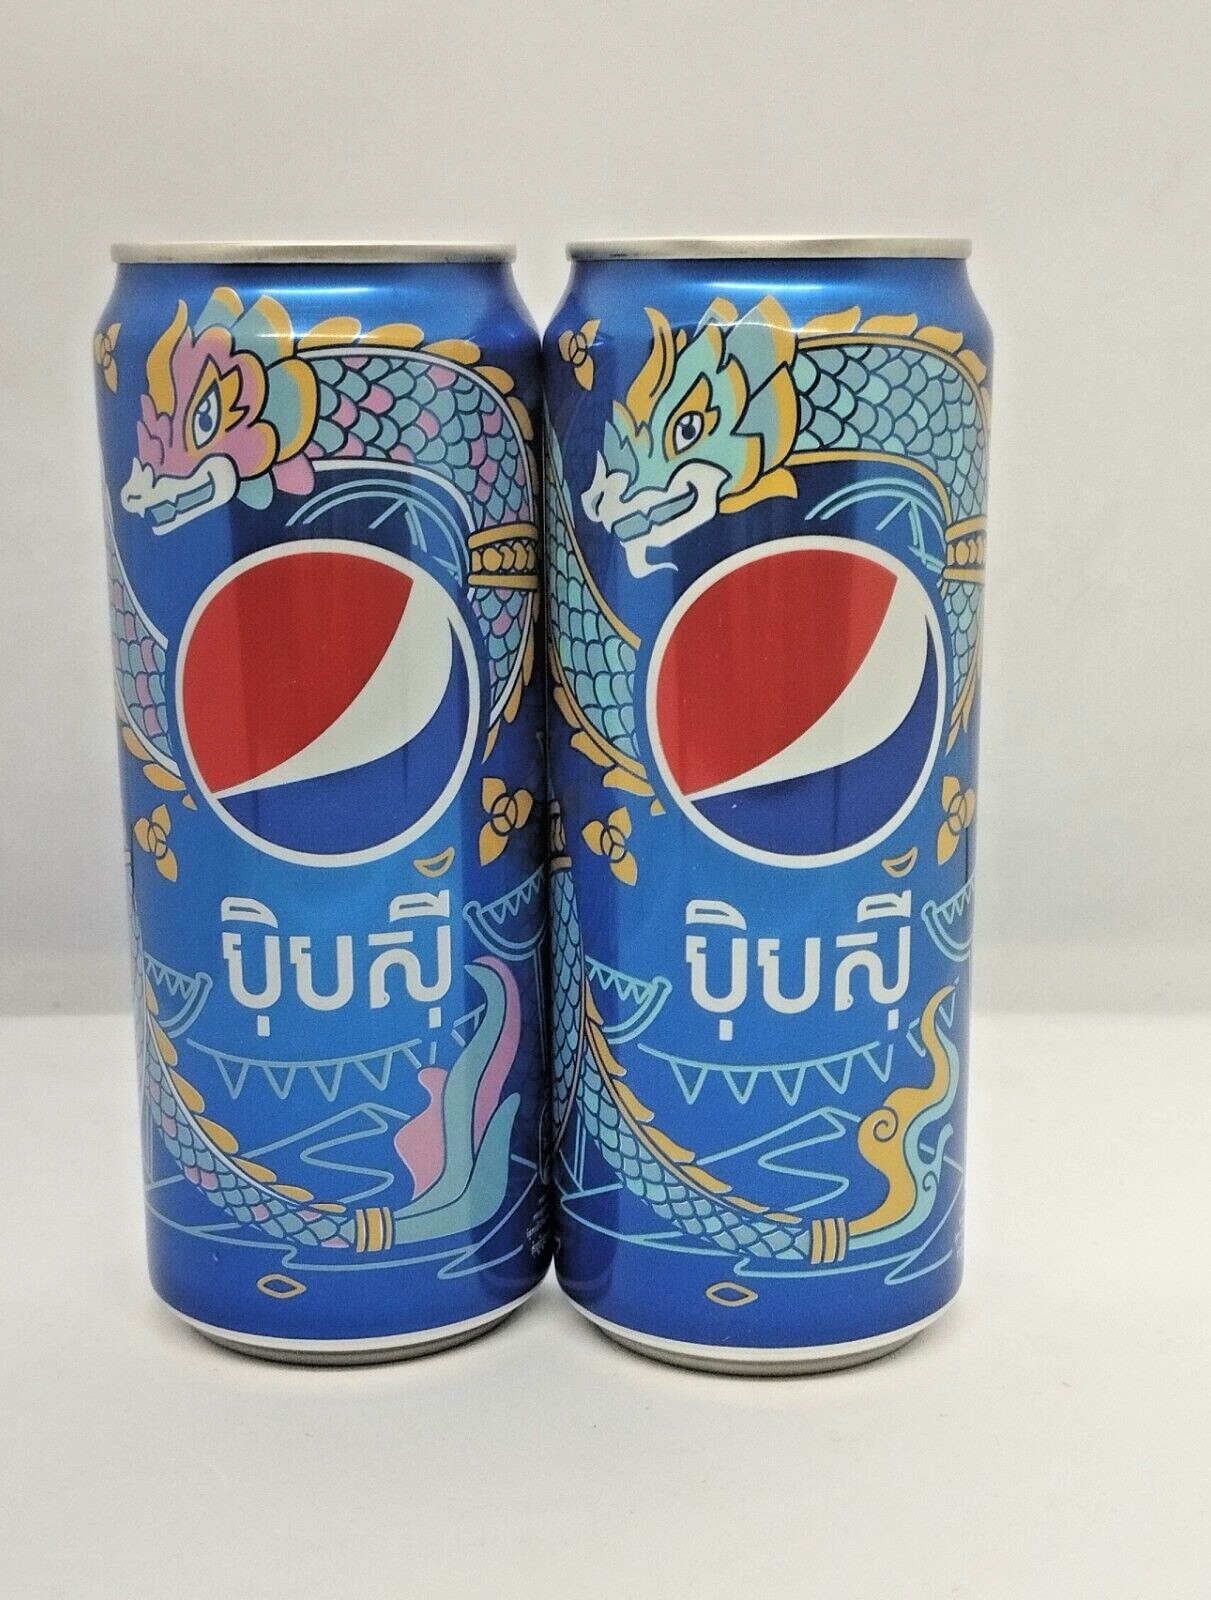 2024 Cambodia Pipsi Khmer New Year Edition Year of the Dragon - 2 Emptied Cans